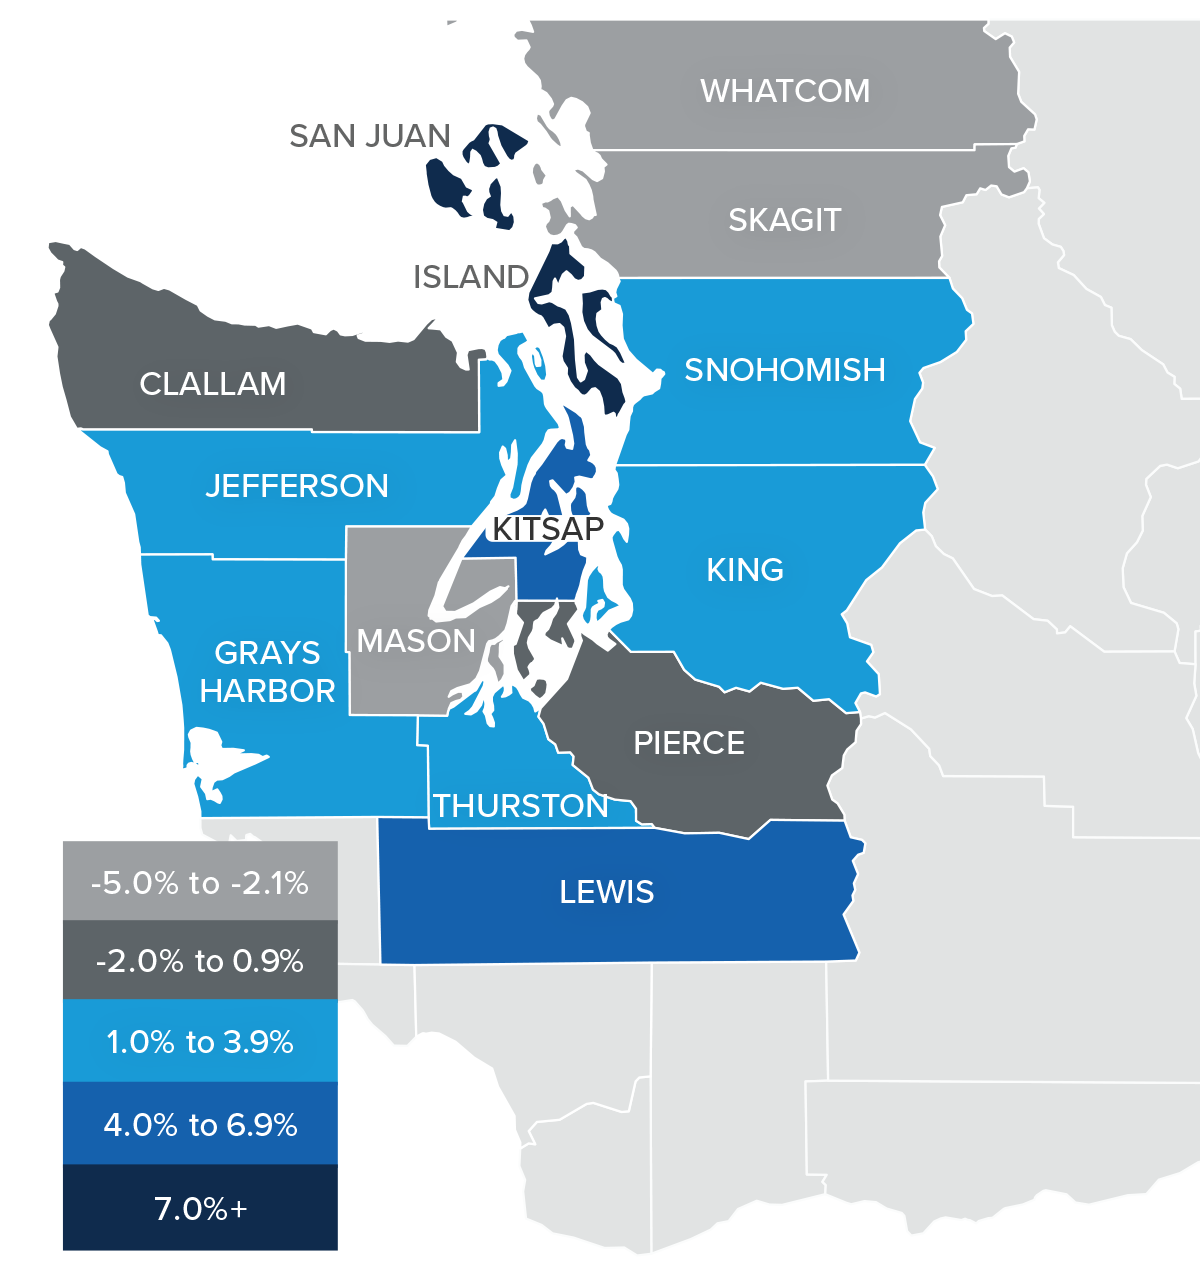 A map showing the real estate home prices percentage changes for various counties in Western Washington. Different colors correspond to different tiers of percentage change. Island and San Juan had percentage changes above 7% and are represented in the corresponding navy color. Lewis and Kitsap Counties were in the 4-6.9% range, King, Jefferson, Thurston, Grays Harbor, and Snohomish were in the 1-3.9% range. Clallam and Pierce were in the -2-0.9% range and Mason, Whatcom, and Skagit were between -5% and -2.1% represented in the light grey color on the map. 